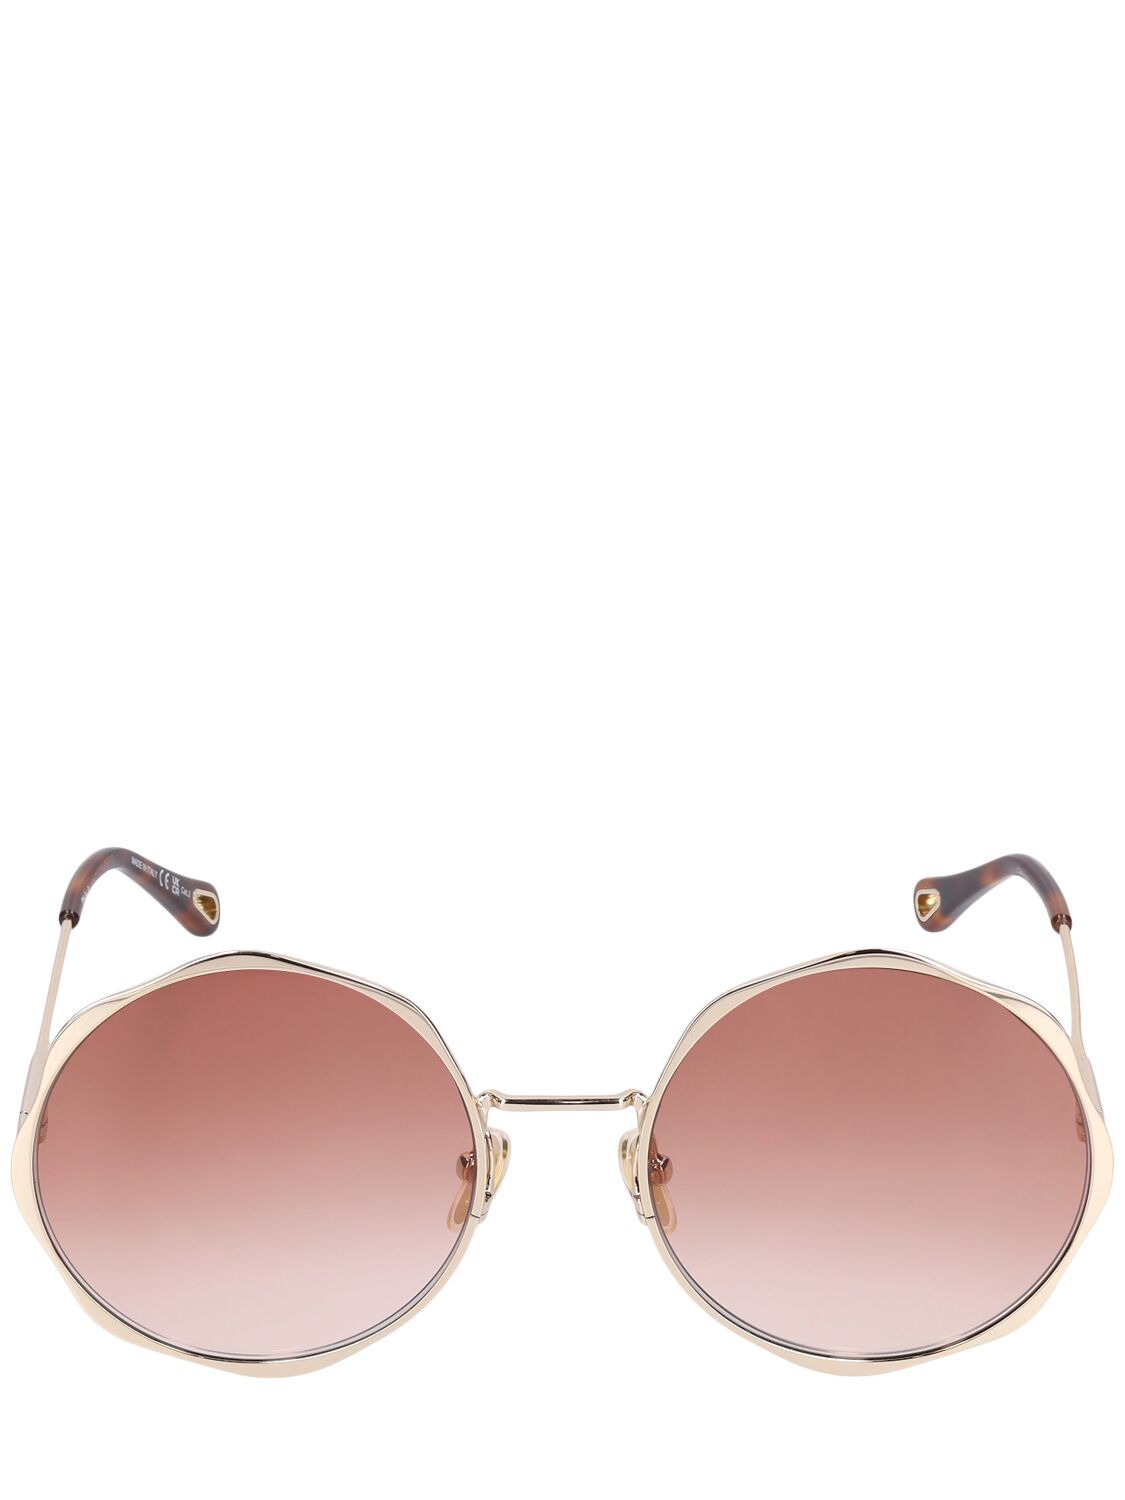 Chloé Scallop Line Round Metal Sunglasses In Pink